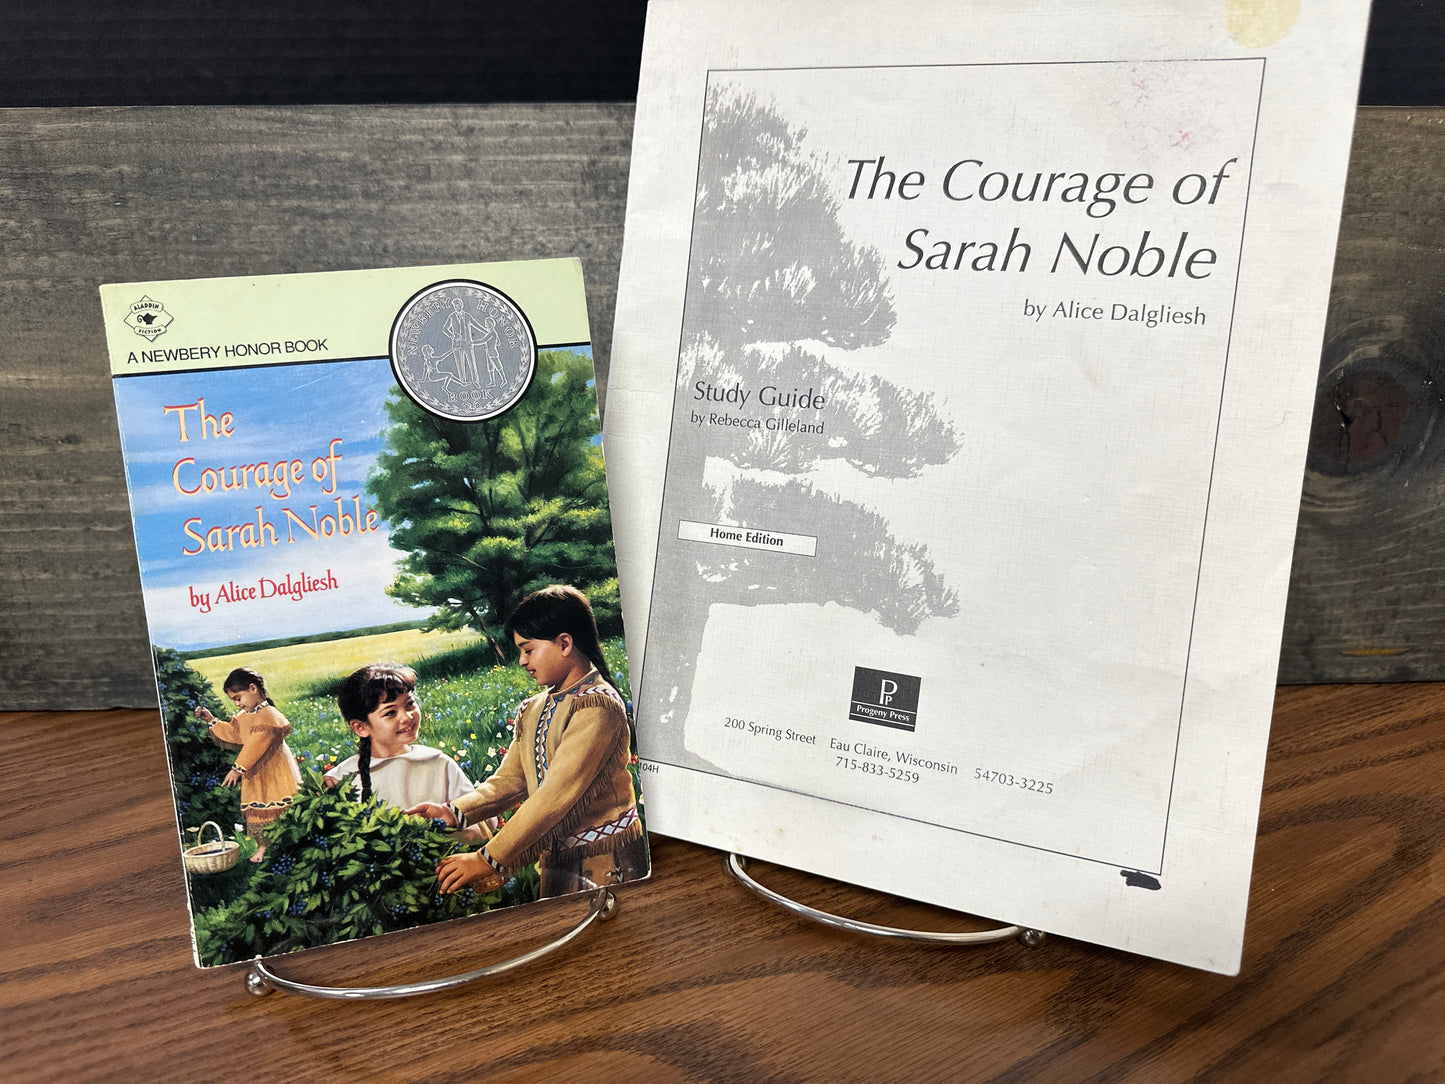 The Courage of Sarah Noble study guide/book set